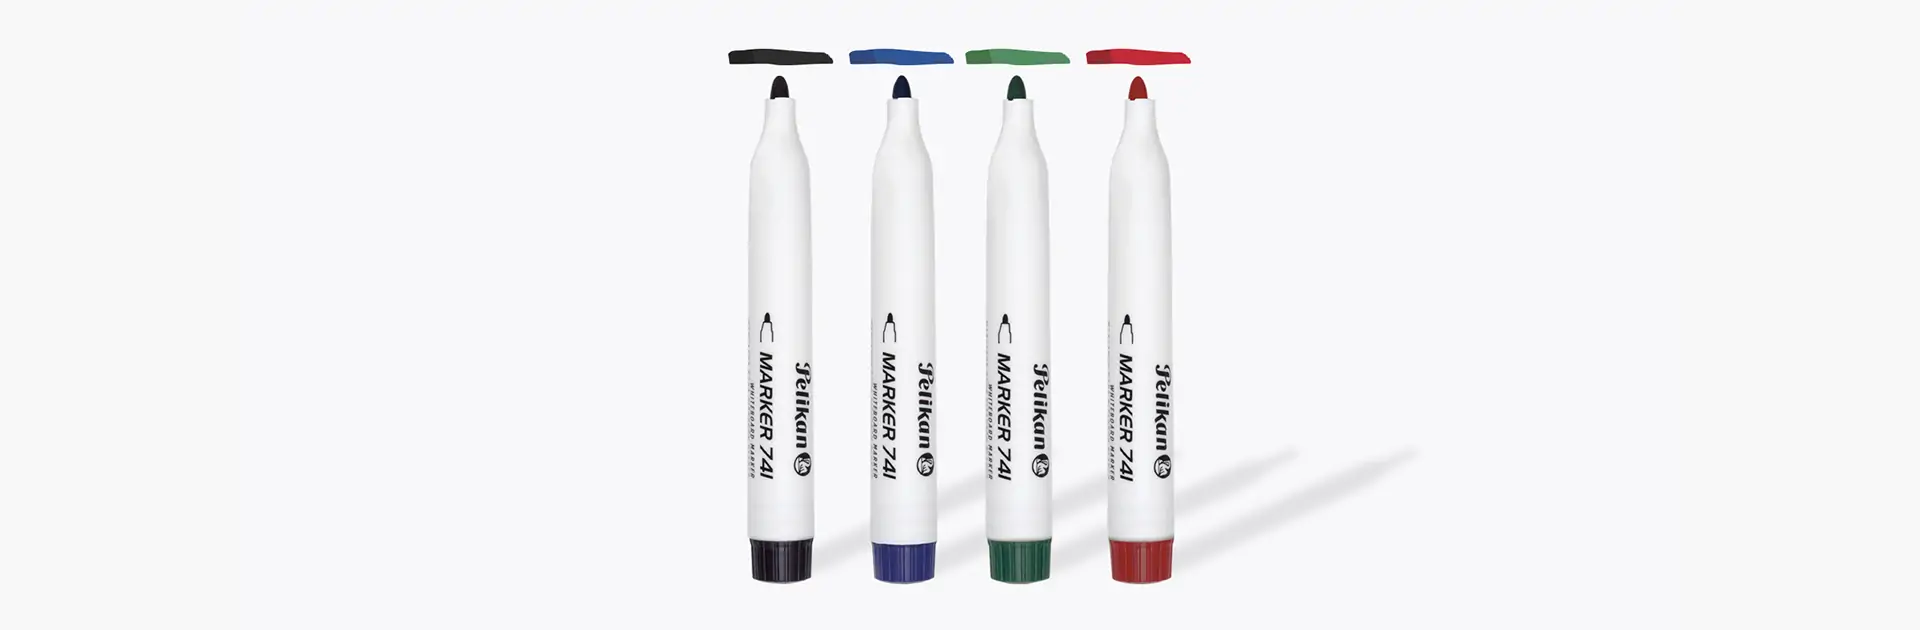 https://www.pelikan.com/images/category/writing/product/marker_741/whiteboard_741_product_assortment.webp